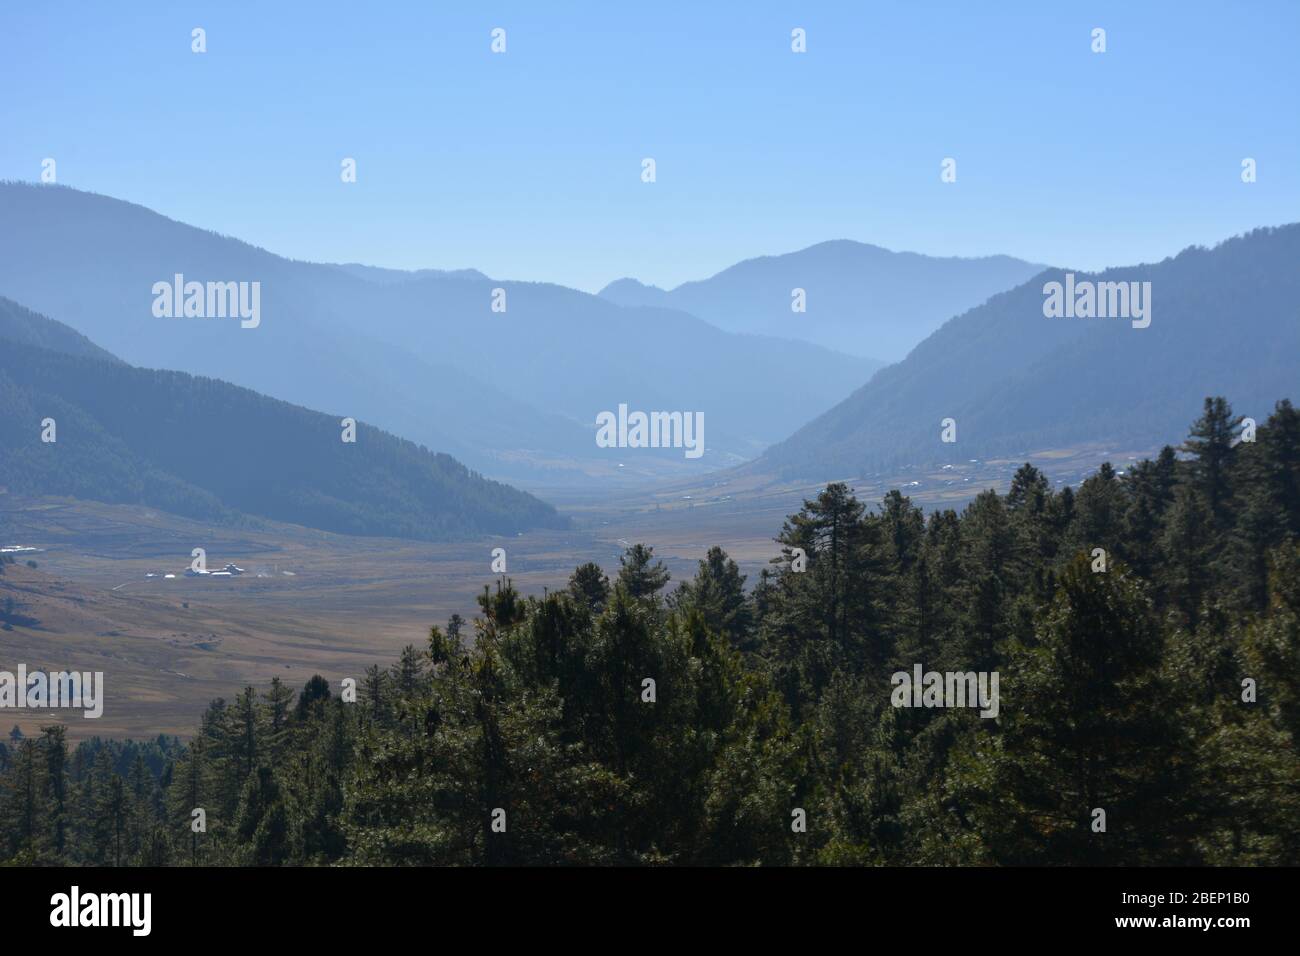 The Phobjikha Valley in the Wangdue Phodrang district of central Bhutan is a U-shaped valley formed by glaciation. Stock Photo